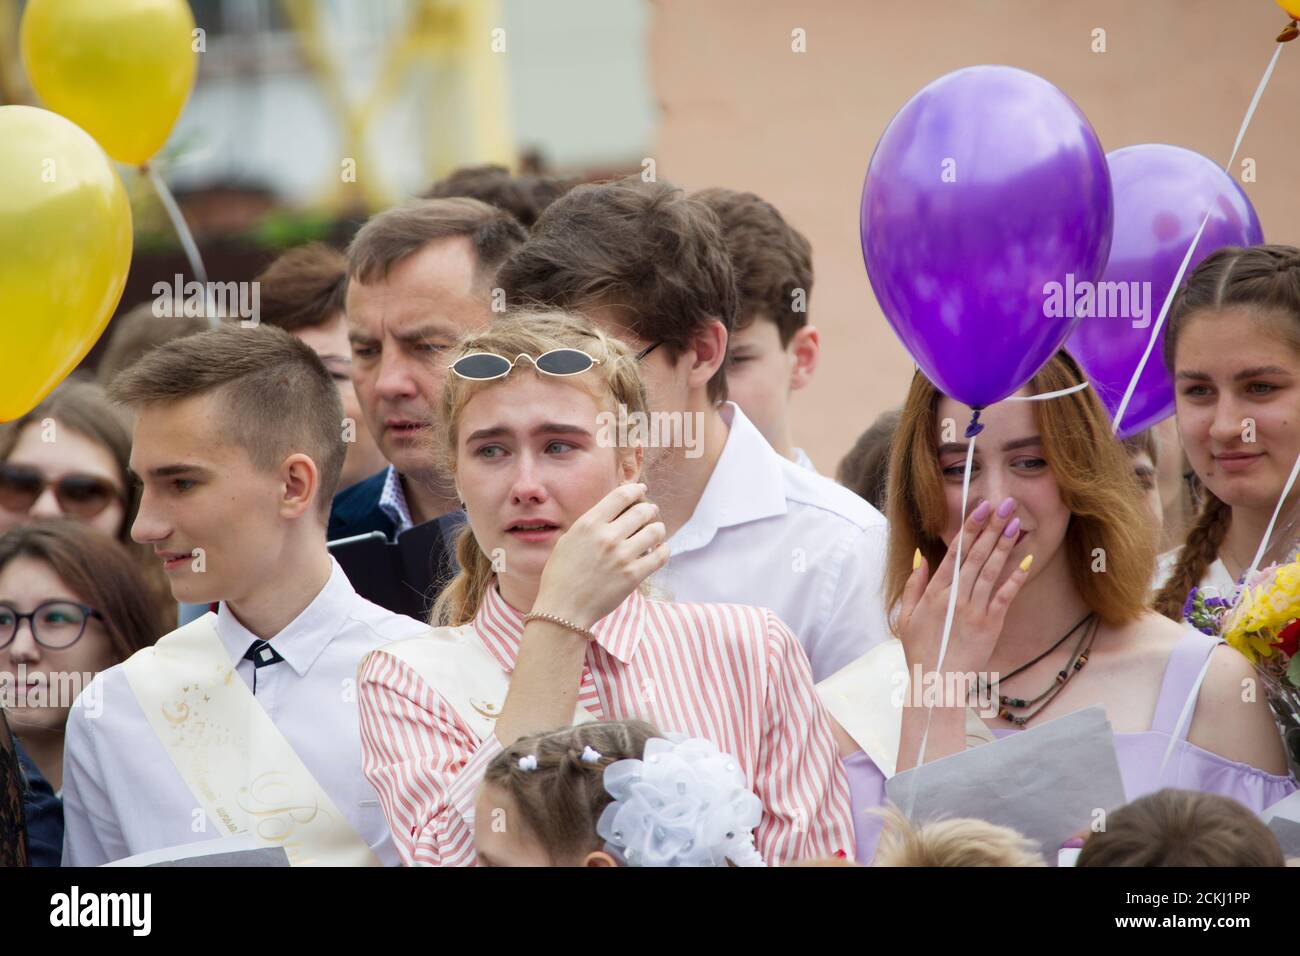 Belarus, the city of Gomel, May 30, 2019. Graduation at school. A group of school graduates are crying. Stock Photo